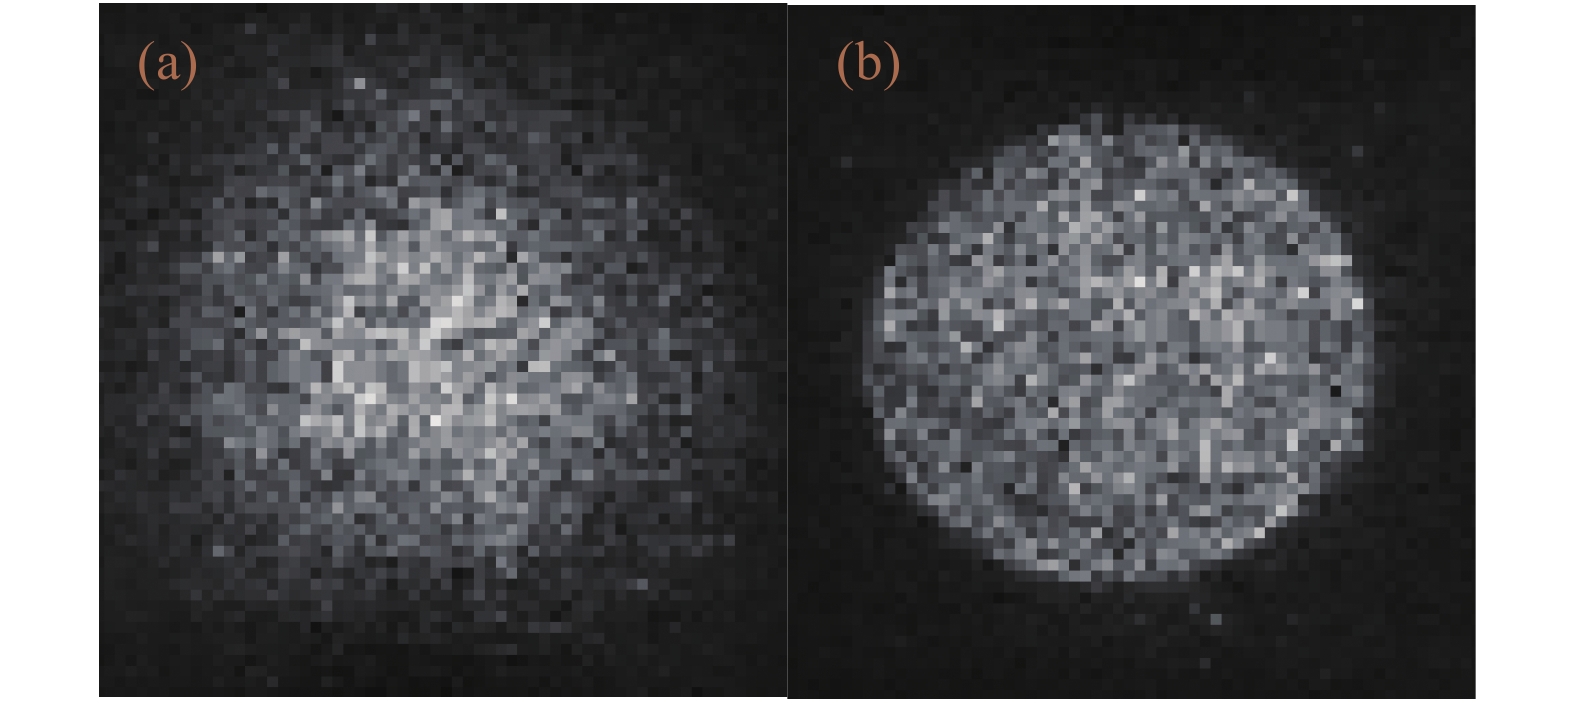 (a) Spatial intensity distribution of original laser beam, (b) spatial intensity distribution of laser beam after reshaping